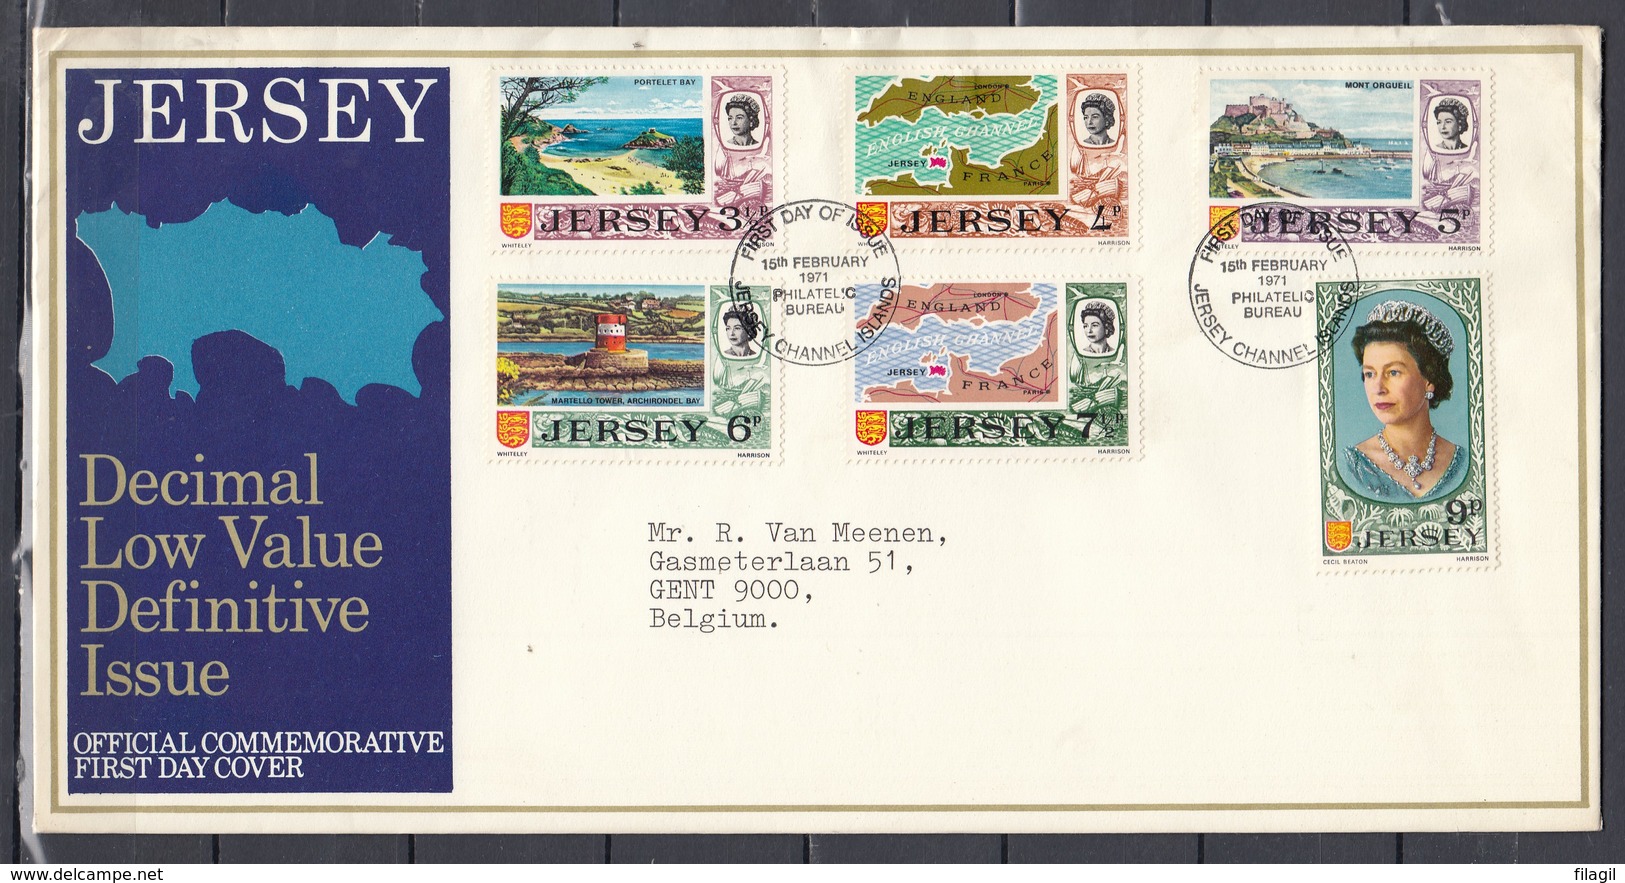 Fdc Jersey - Decimal Low Value Definitive Issue - Jersey Channel Islands (15 February 1971) - Jersey